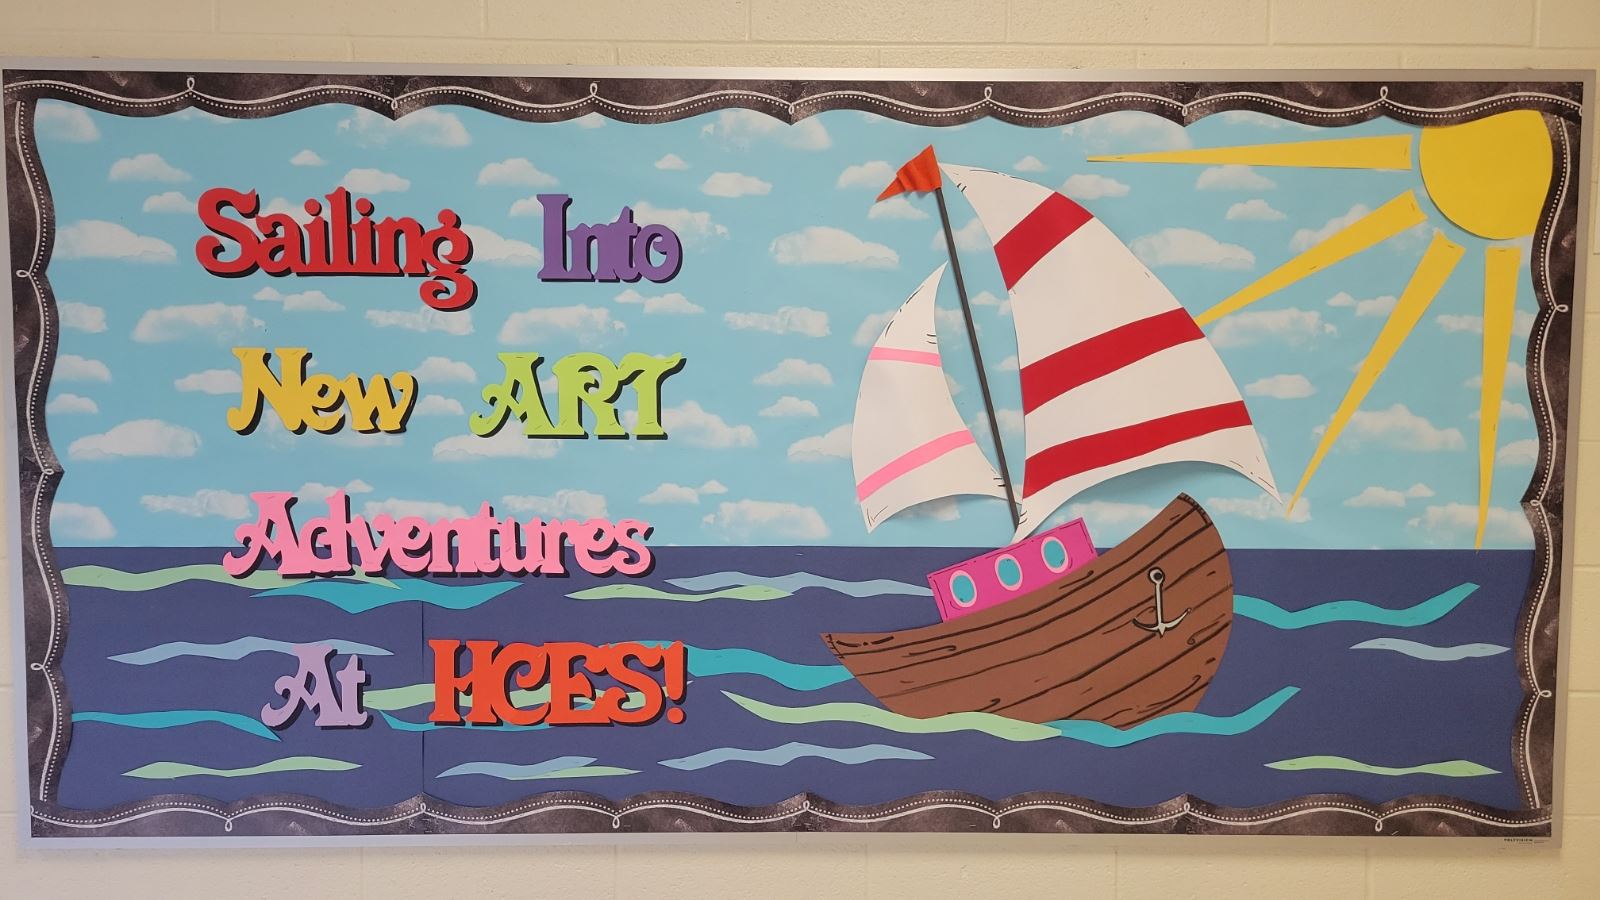  Sailing into new art adventures at HCE